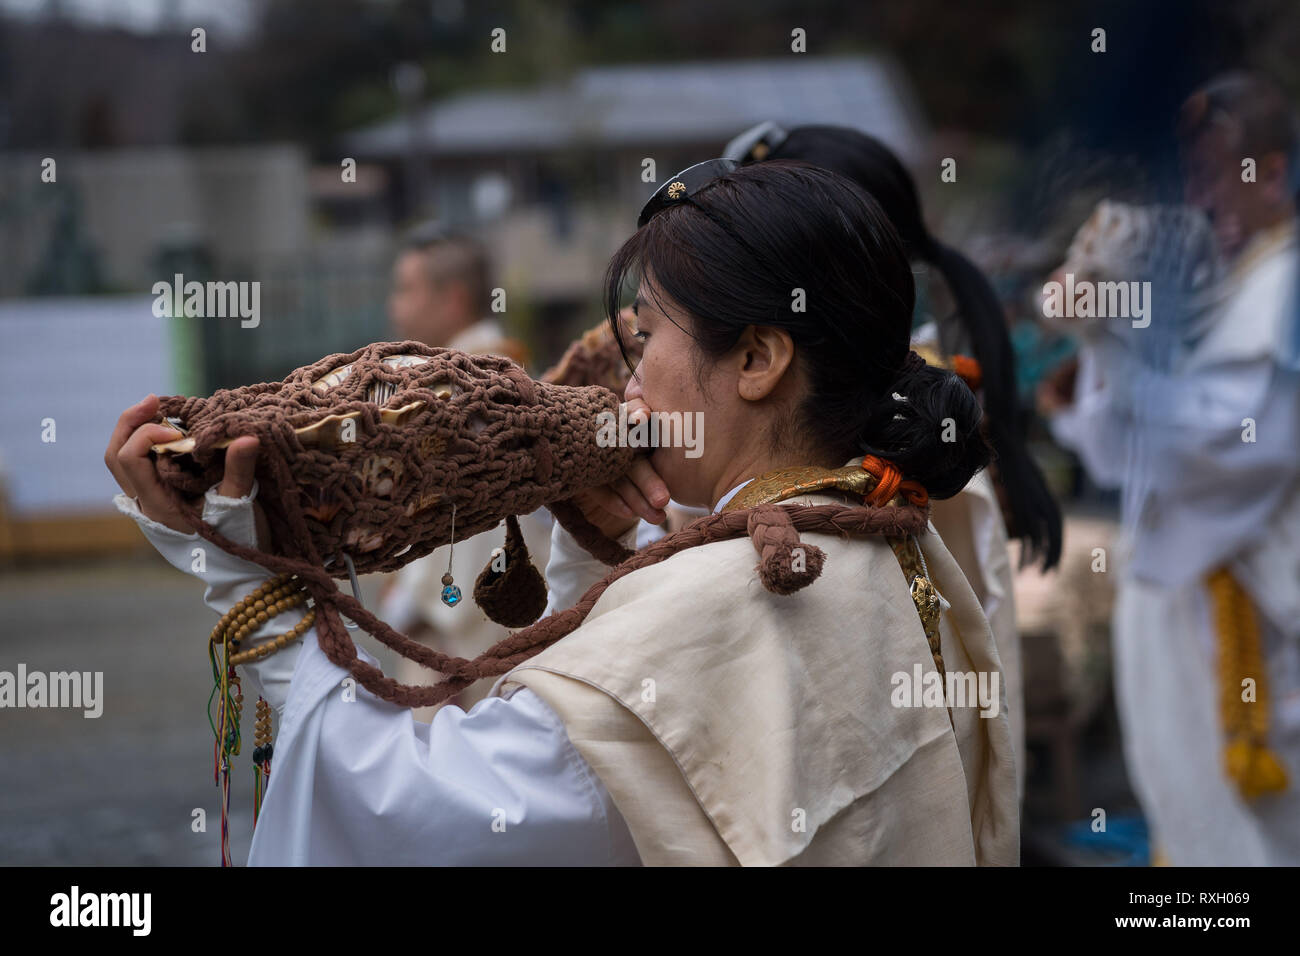 Tokyo, Japan. 10th March 2019. 'Yamabushi' blows in a conch shell horns during a fire walking ceremony (Hiwatari-sai festival in Japanese) which heralds the coming of spring, at Yakuoin Temple on Mt. Takao in the city of Hachioji in western Tokyo, 10 March 2019. Credit: Nicolas Datiche/AFLO/Alamy Live News Credit: Aflo Co. Ltd./Alamy Live News Stock Photo